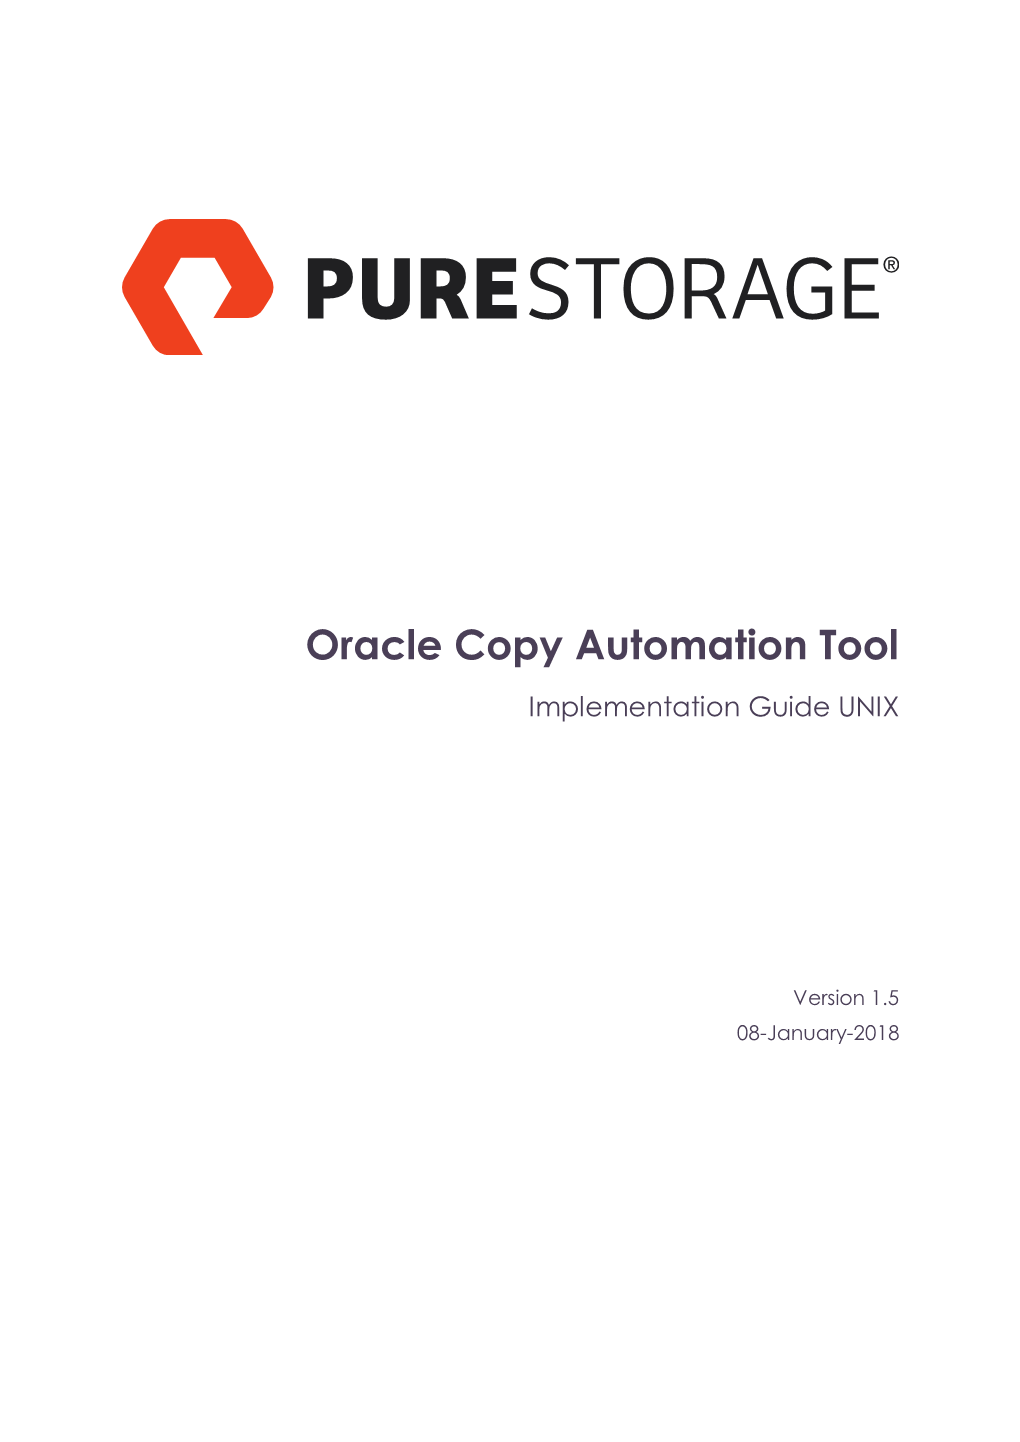 Oracle Copy Automation Tool Implementation Guide UNIX